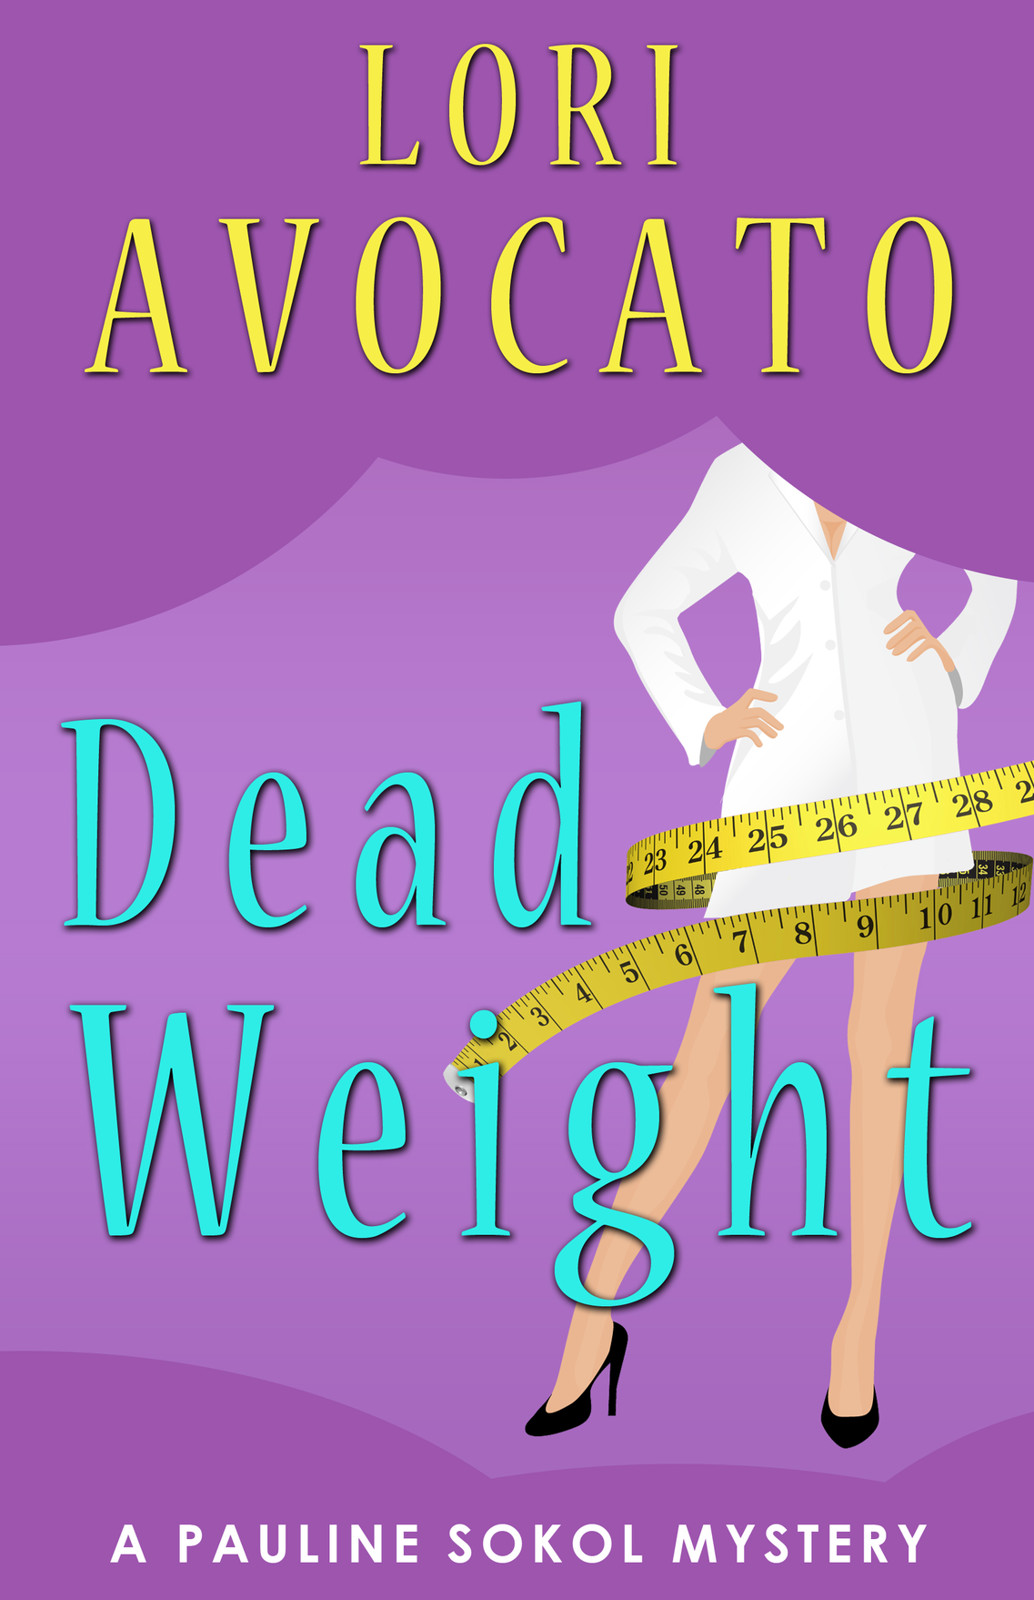 Dead Weight by Lori Avocato